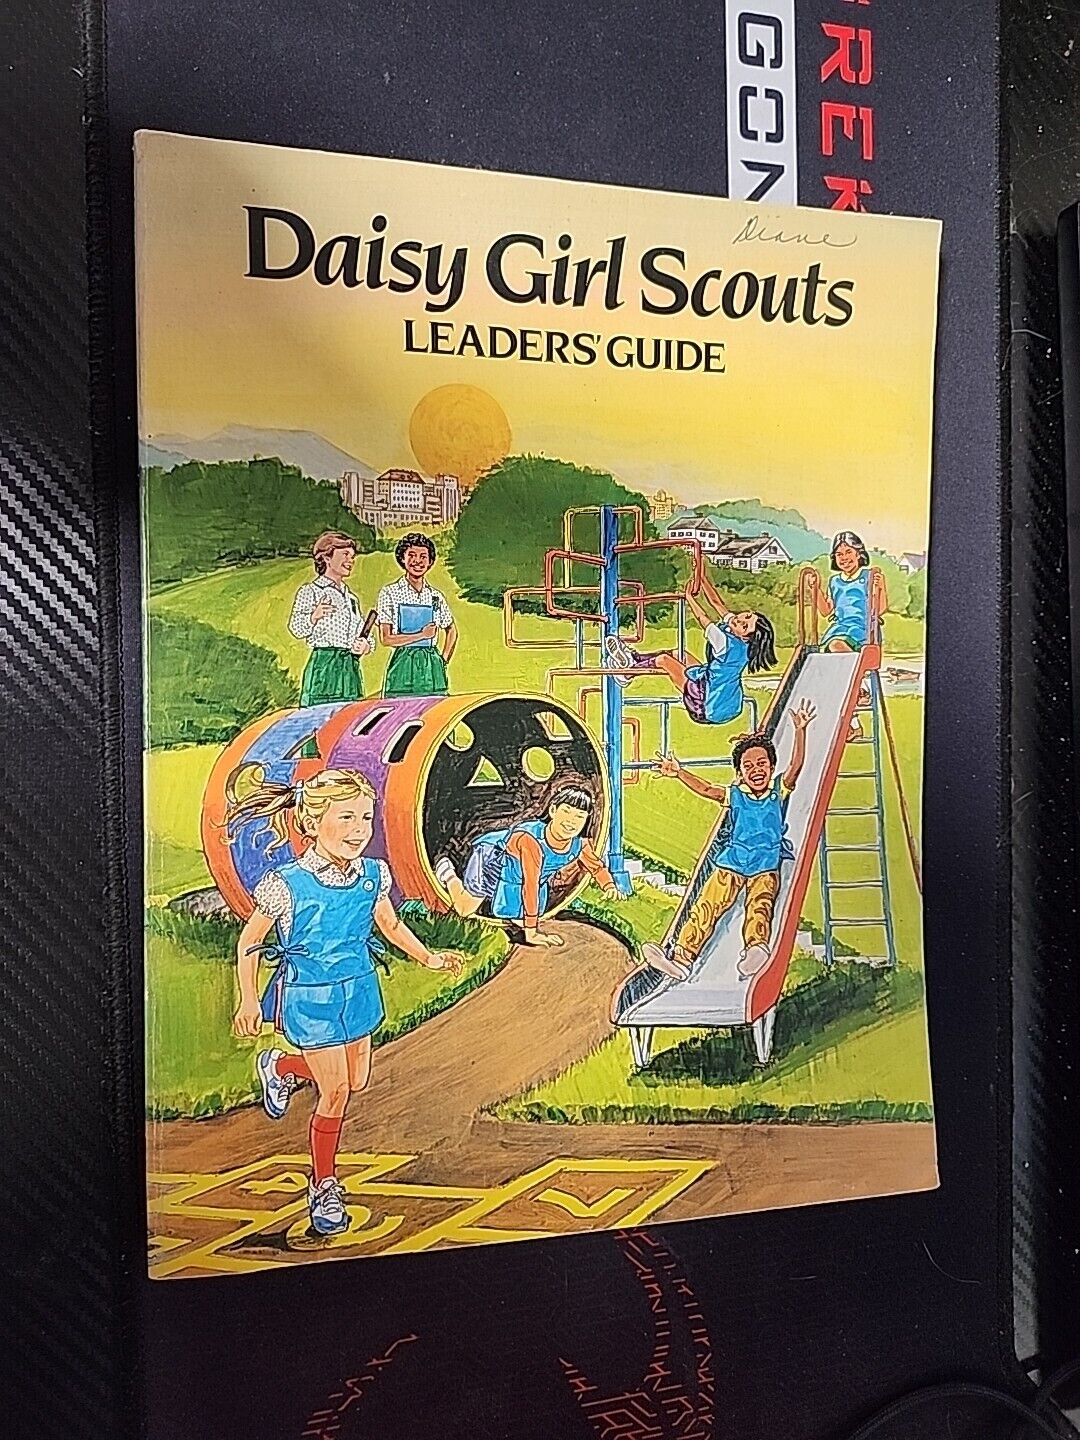 Daisy Girl Scouts Leaders' Guide